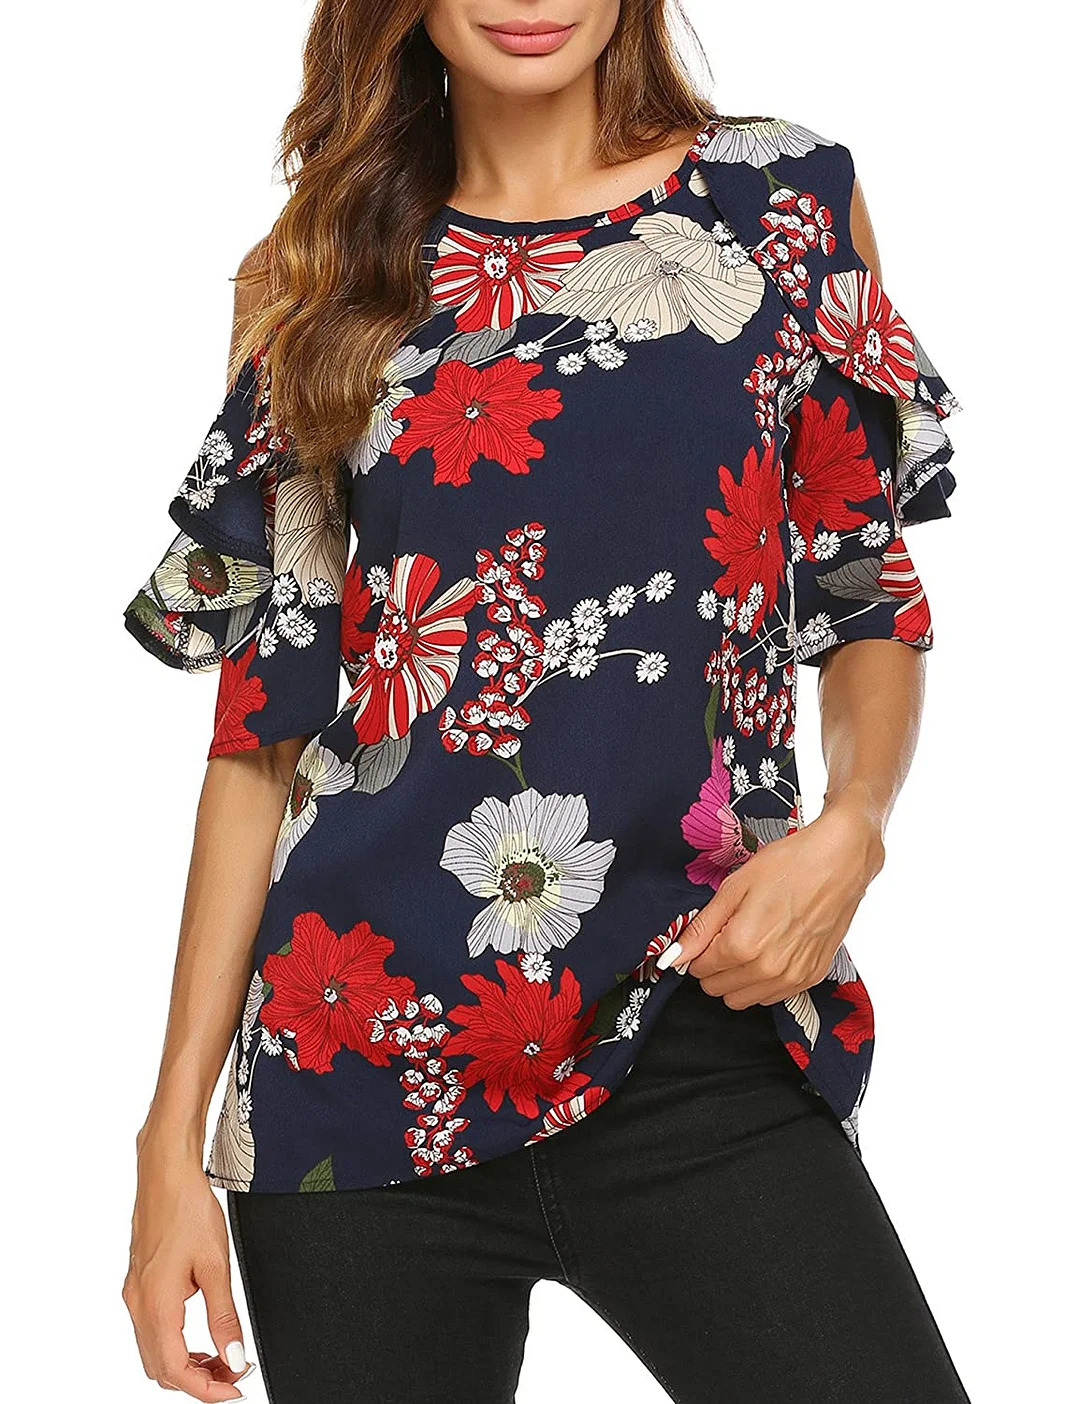 Women's Short Sleeve Casual Cold Shoulder Top Loose Blouse Tunic Tops